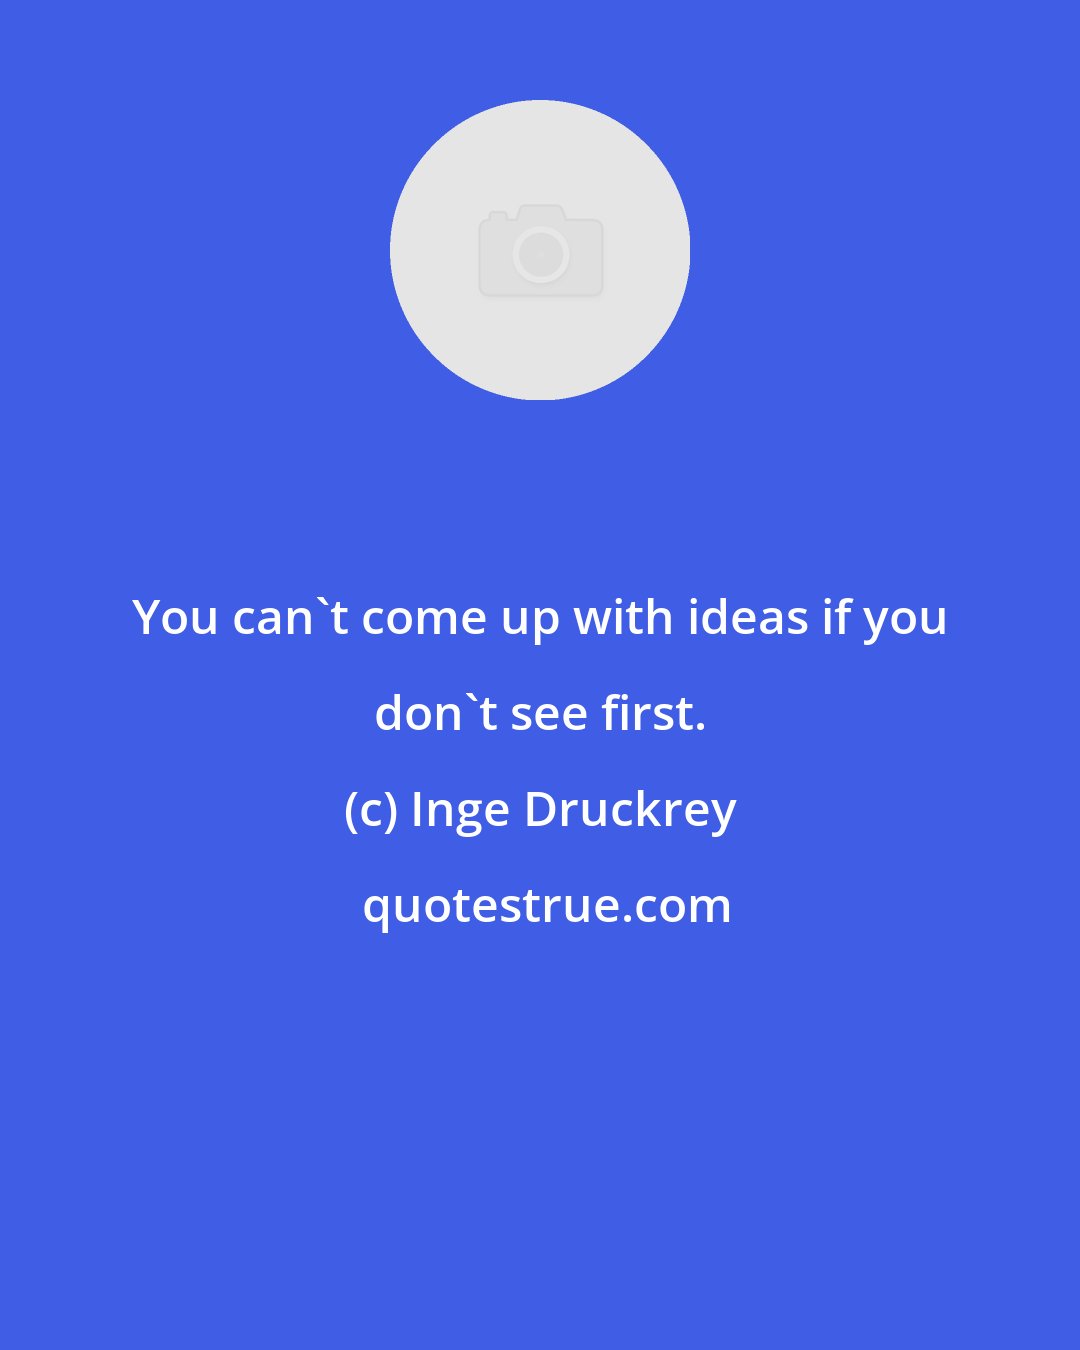 Inge Druckrey: You can't come up with ideas if you don't see first.